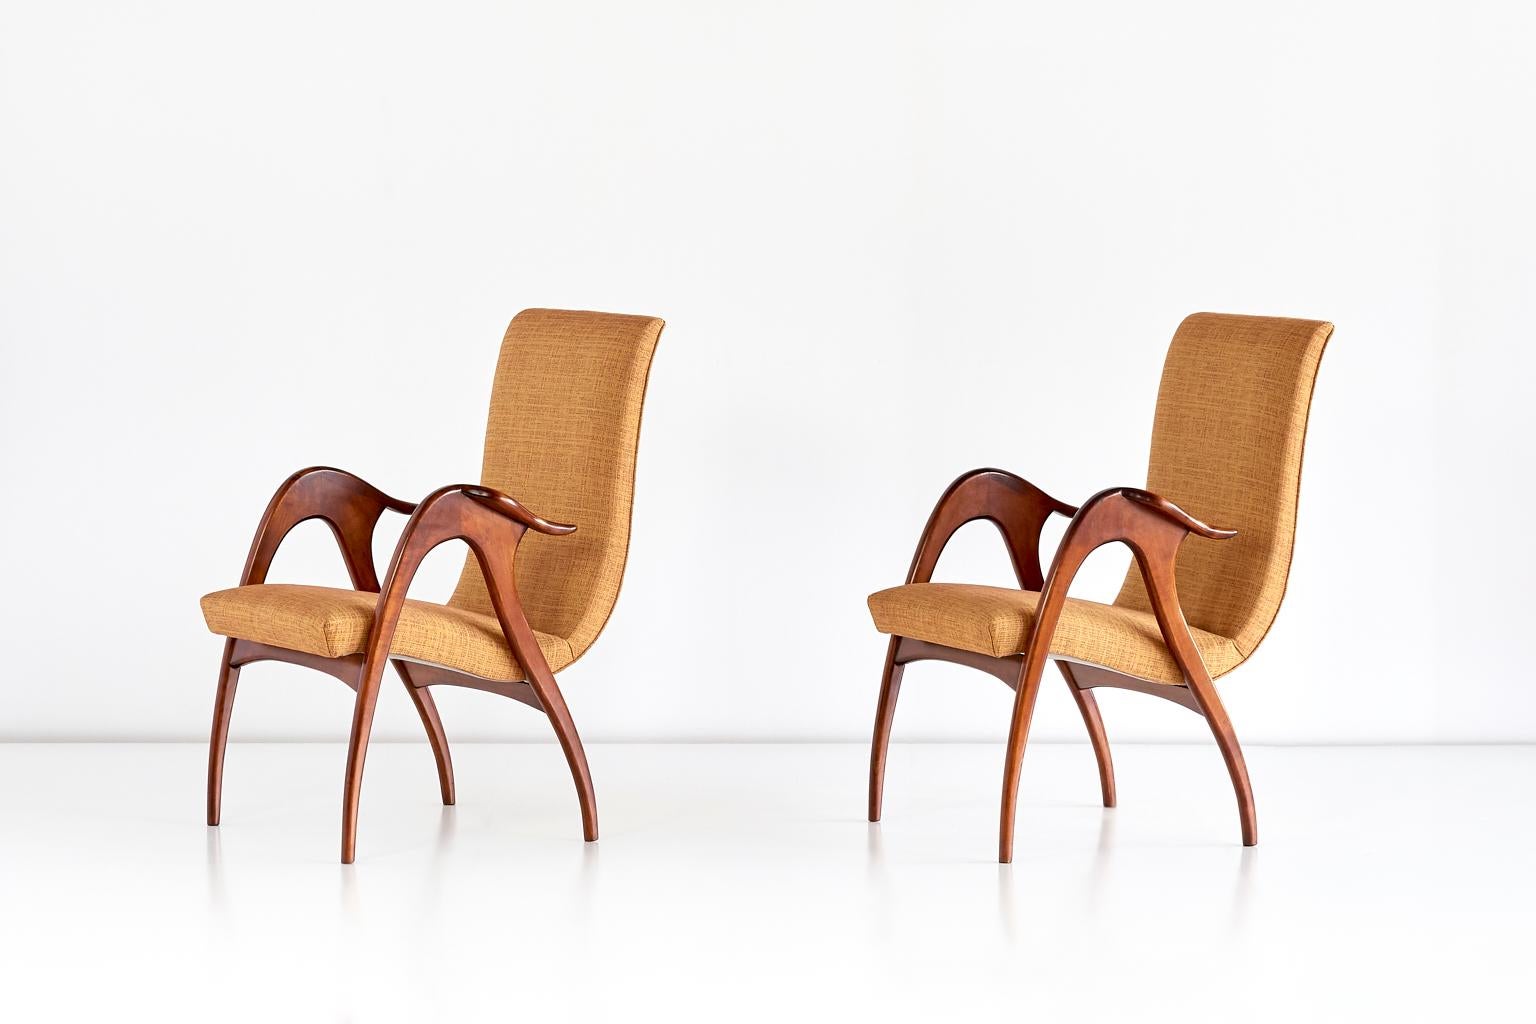 These sculptural armchairs were produced by Malatesta and Mason in Rome in the early 1950s. The elegant, organically shaped frames are complemented by the dynamically flowing line of the seat. The legs and armrests are characterized by the warm